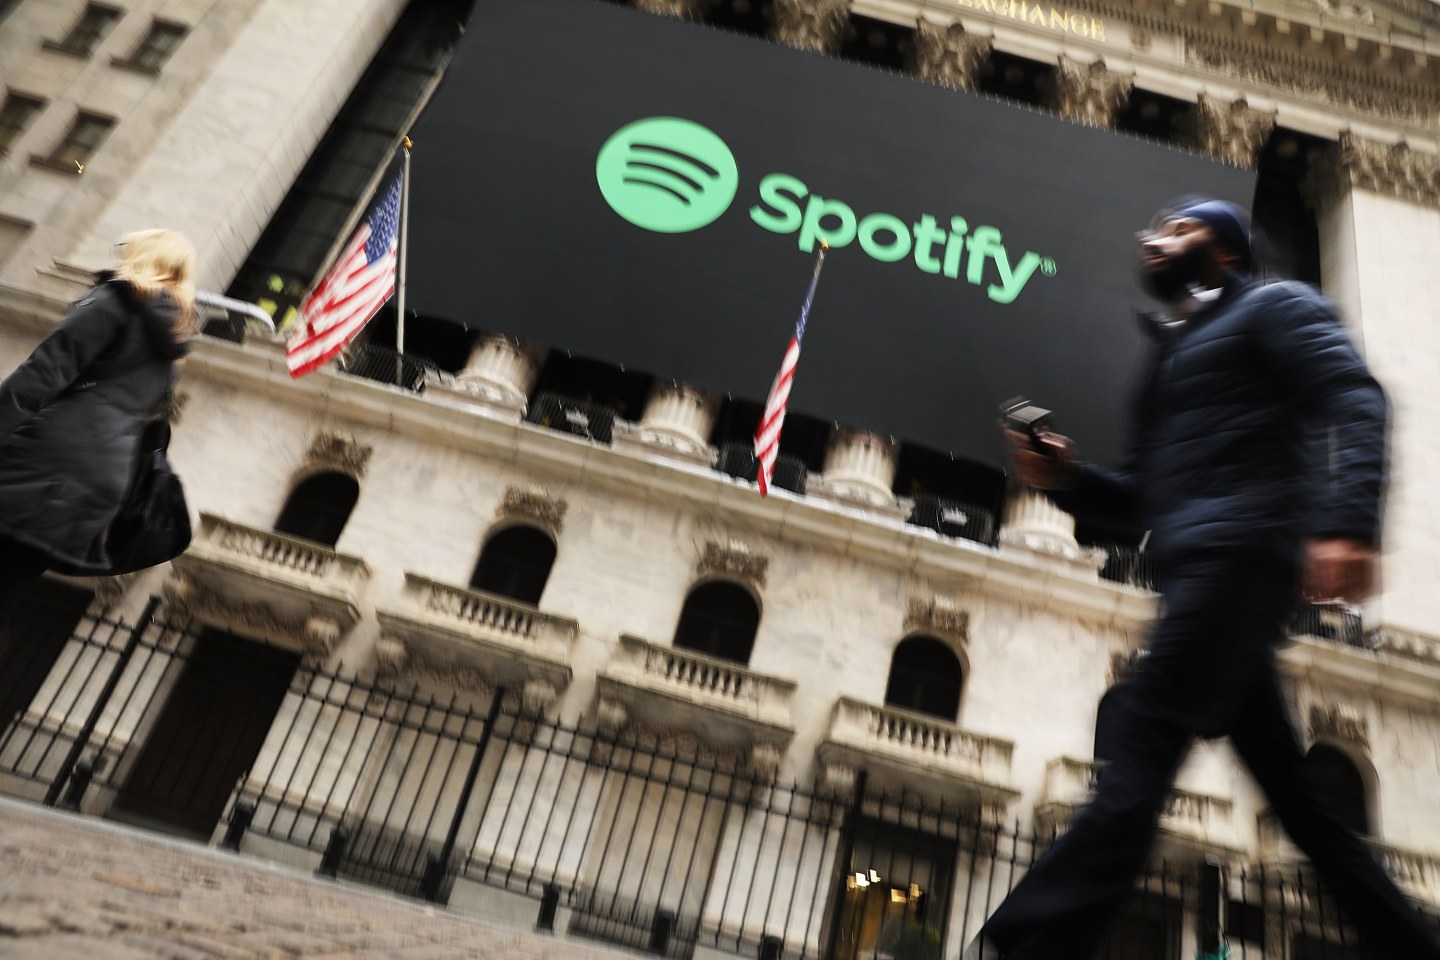 Is Spotify really listening to artists “Loud & Clear?”